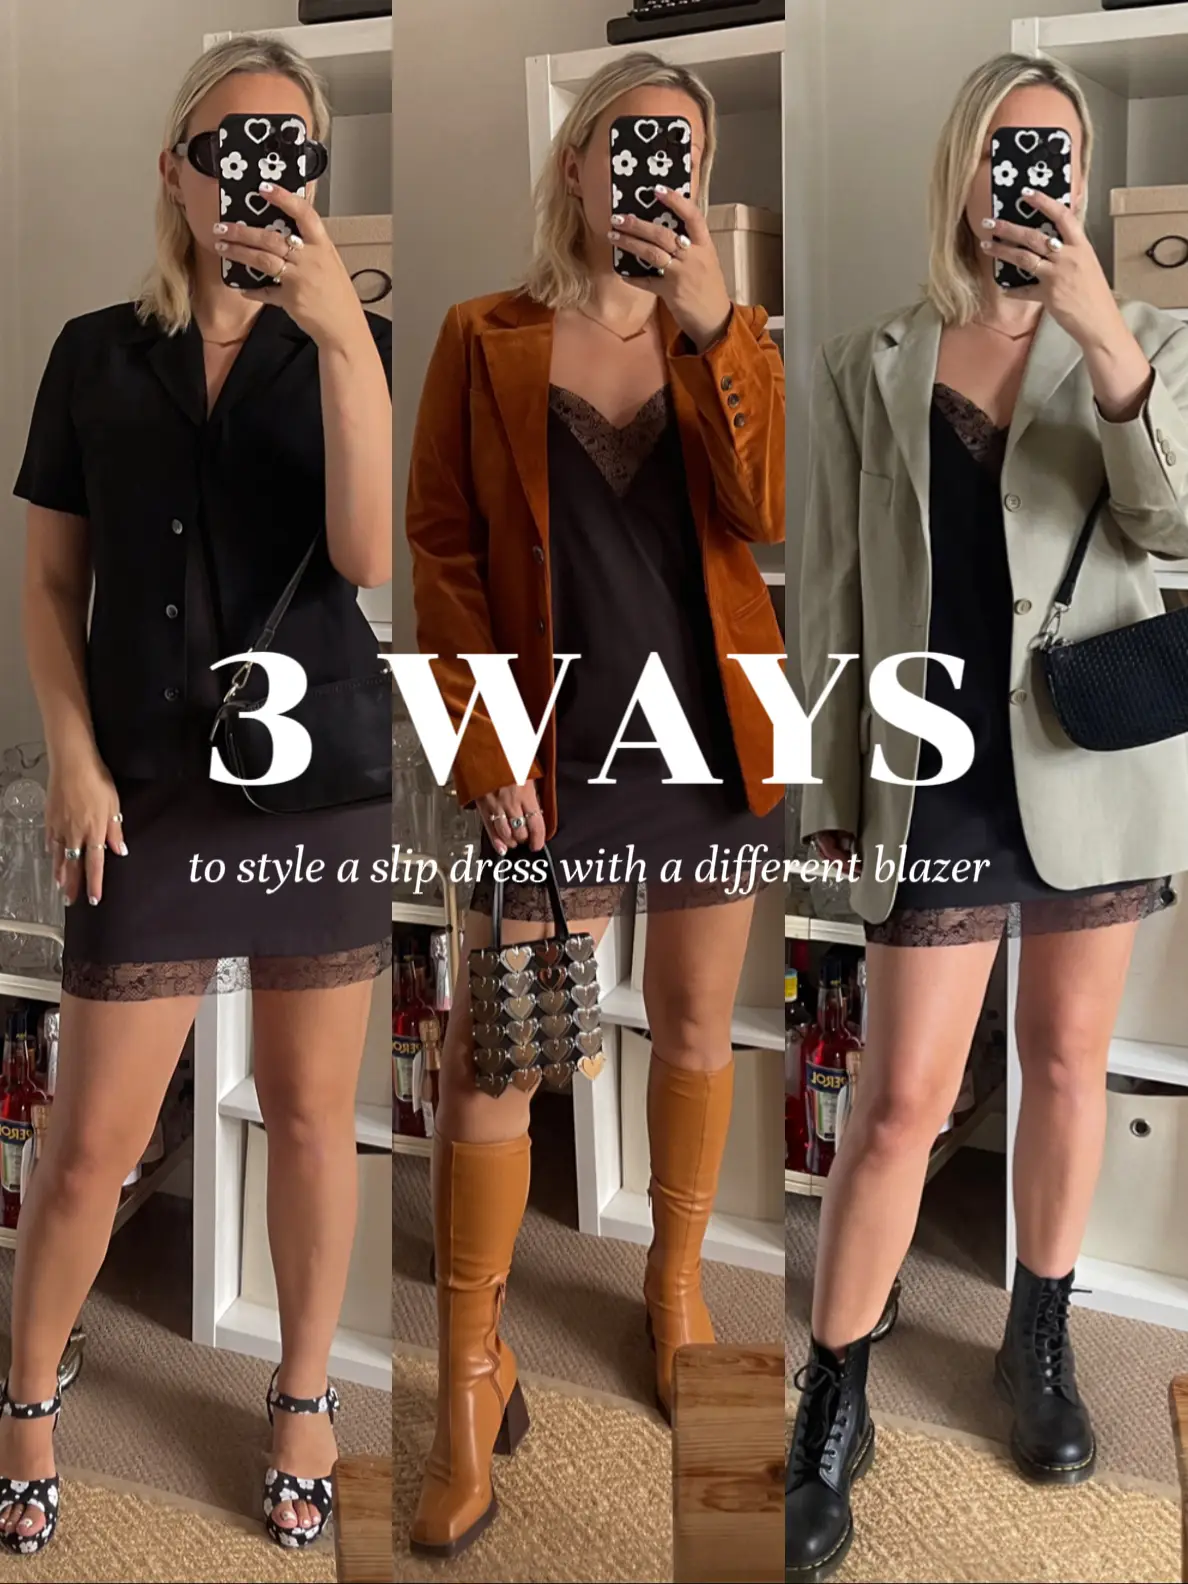 3 WAYS TO STYLE A SLIP DRESS AND BLAZER, Gallery posted by Lauren Nicole